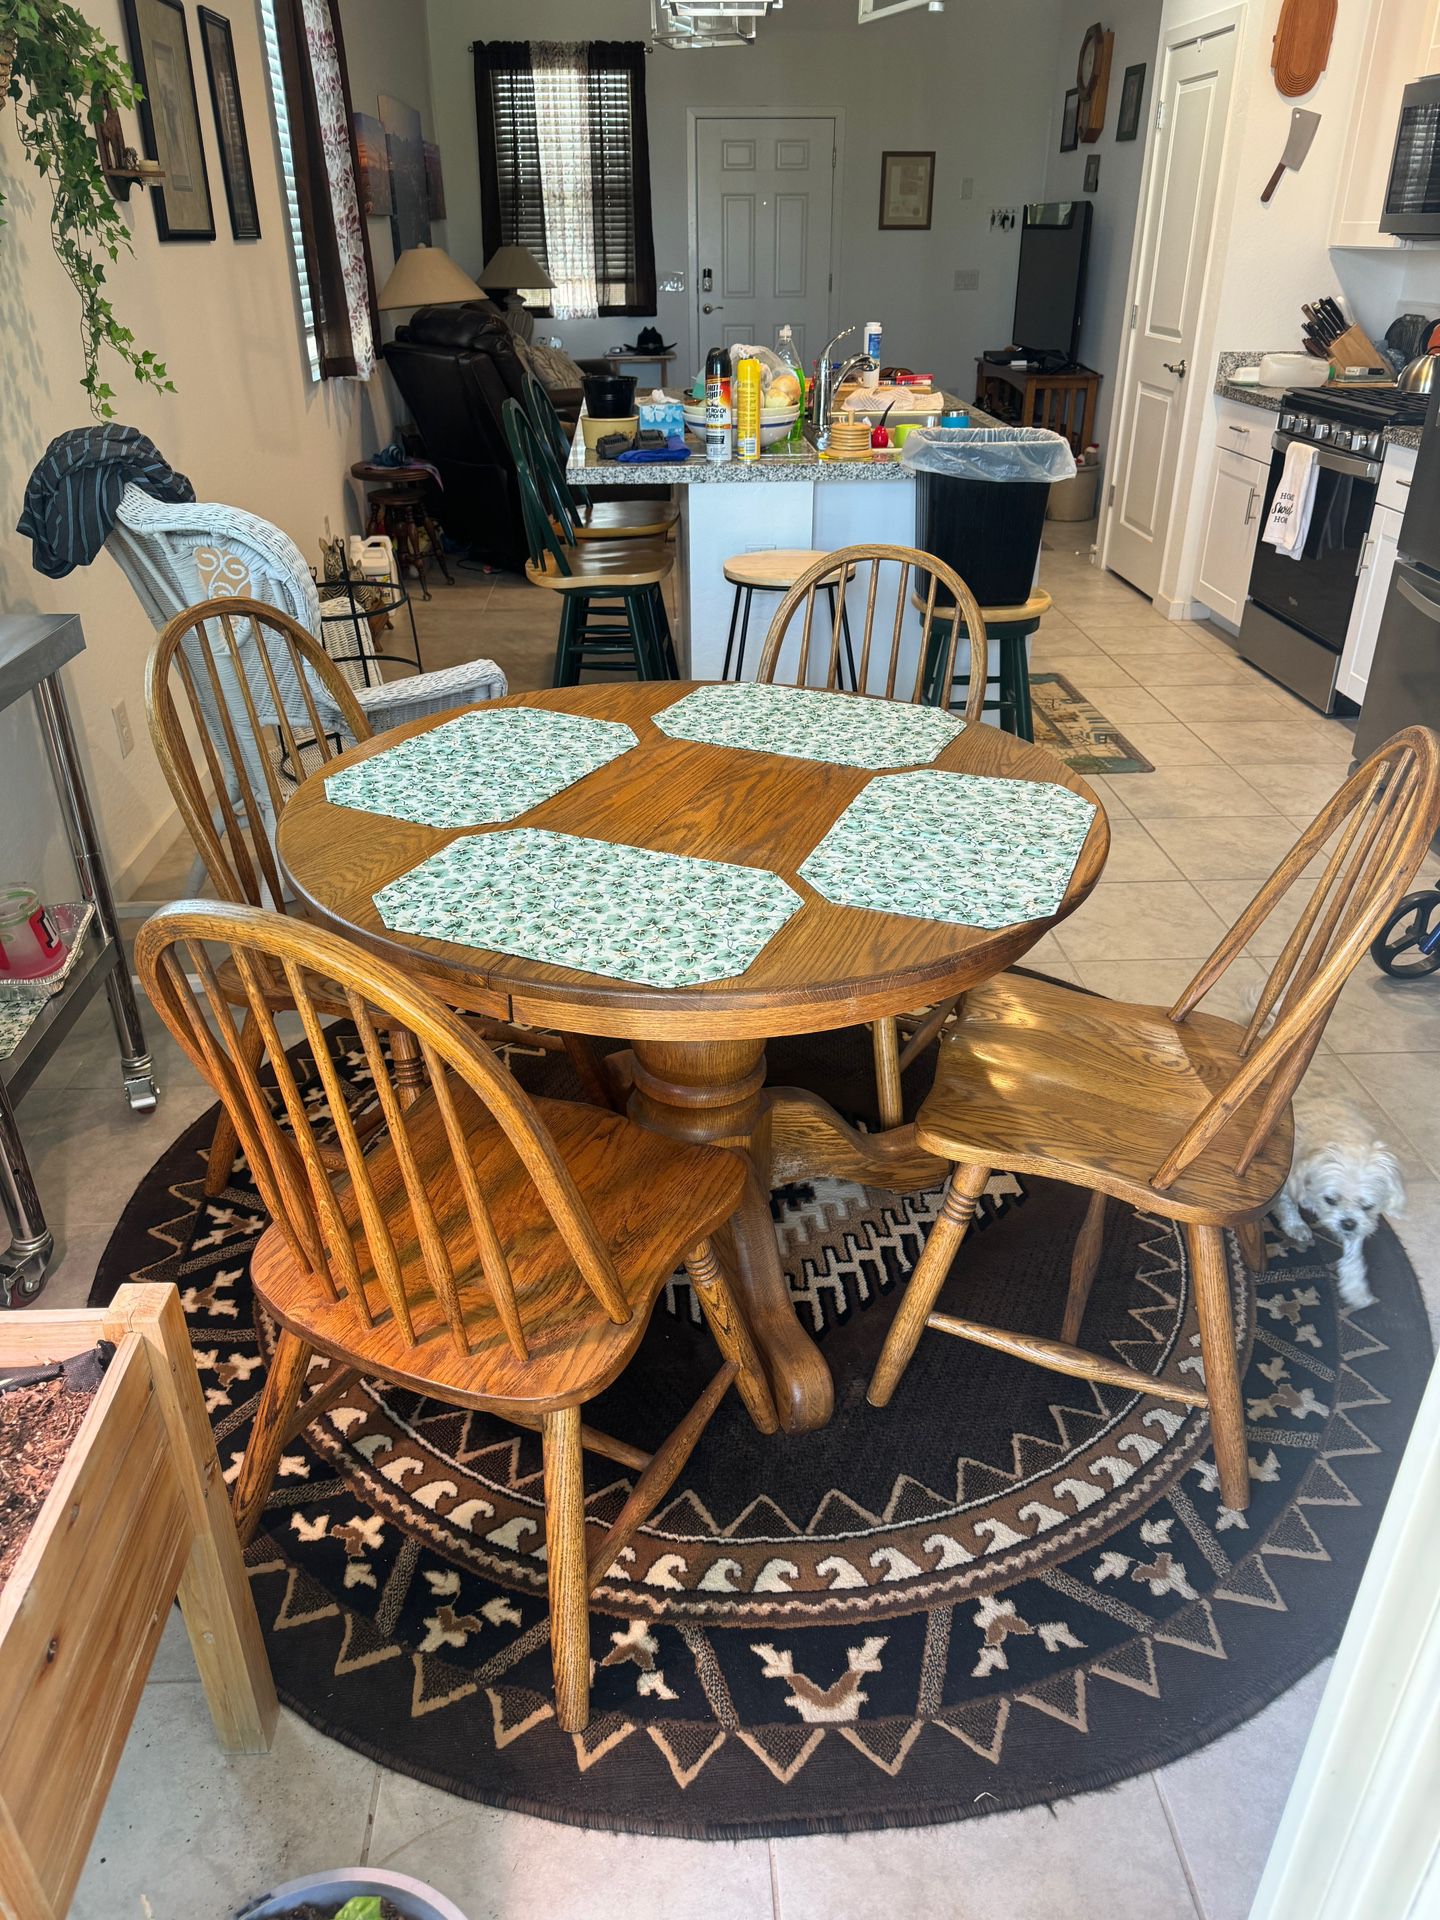 Round Oak Kitchen Table, Chairs & Rug